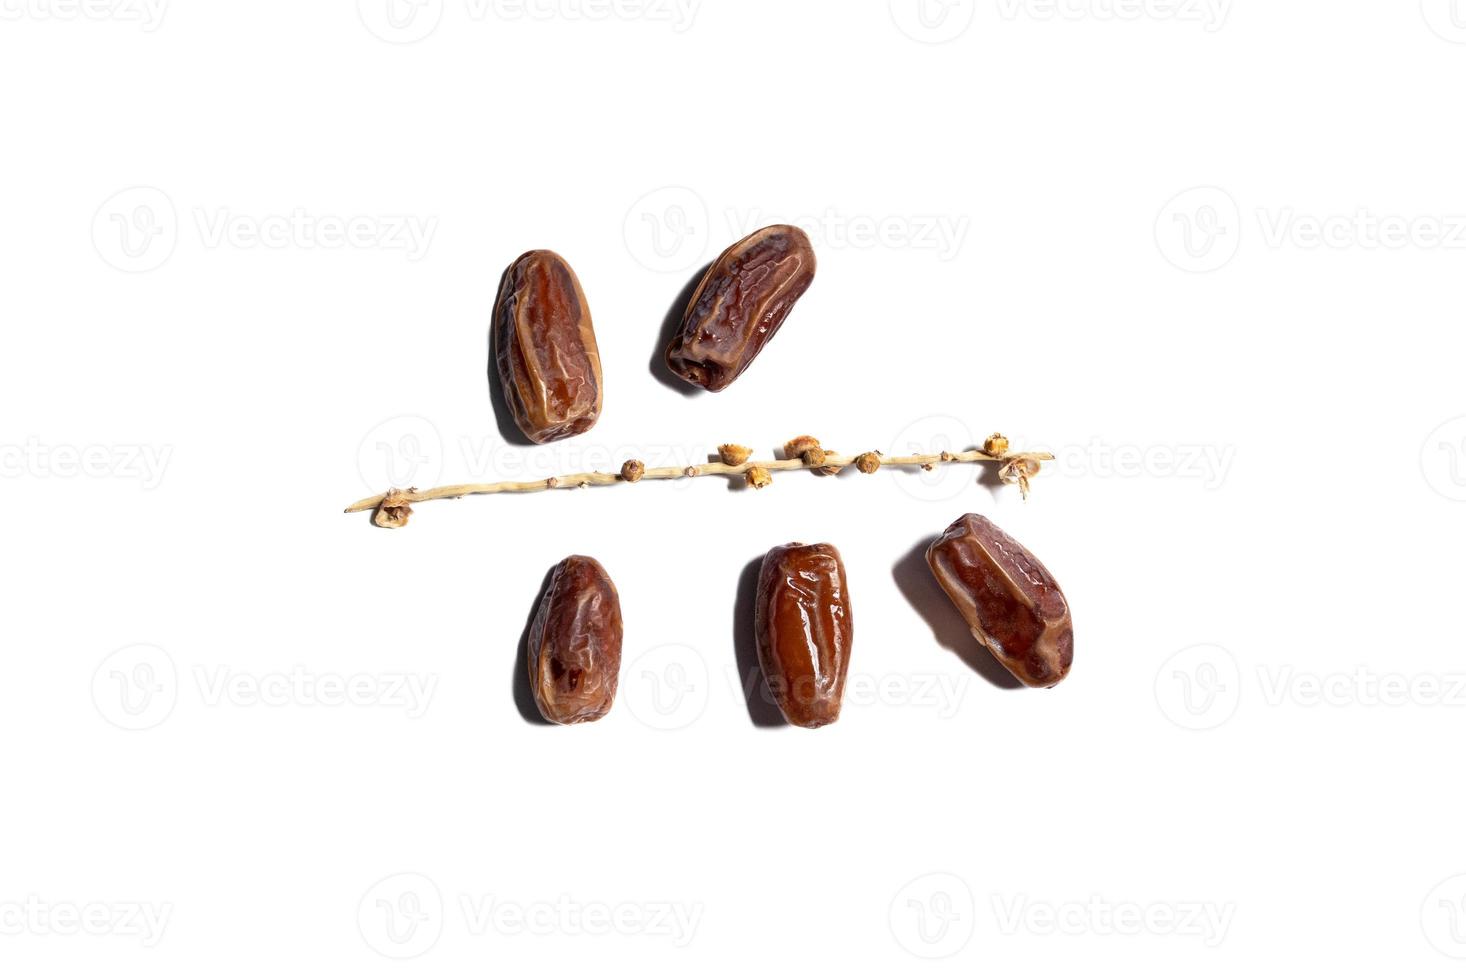 Dates fruit isolated on white background, after some edits. photo